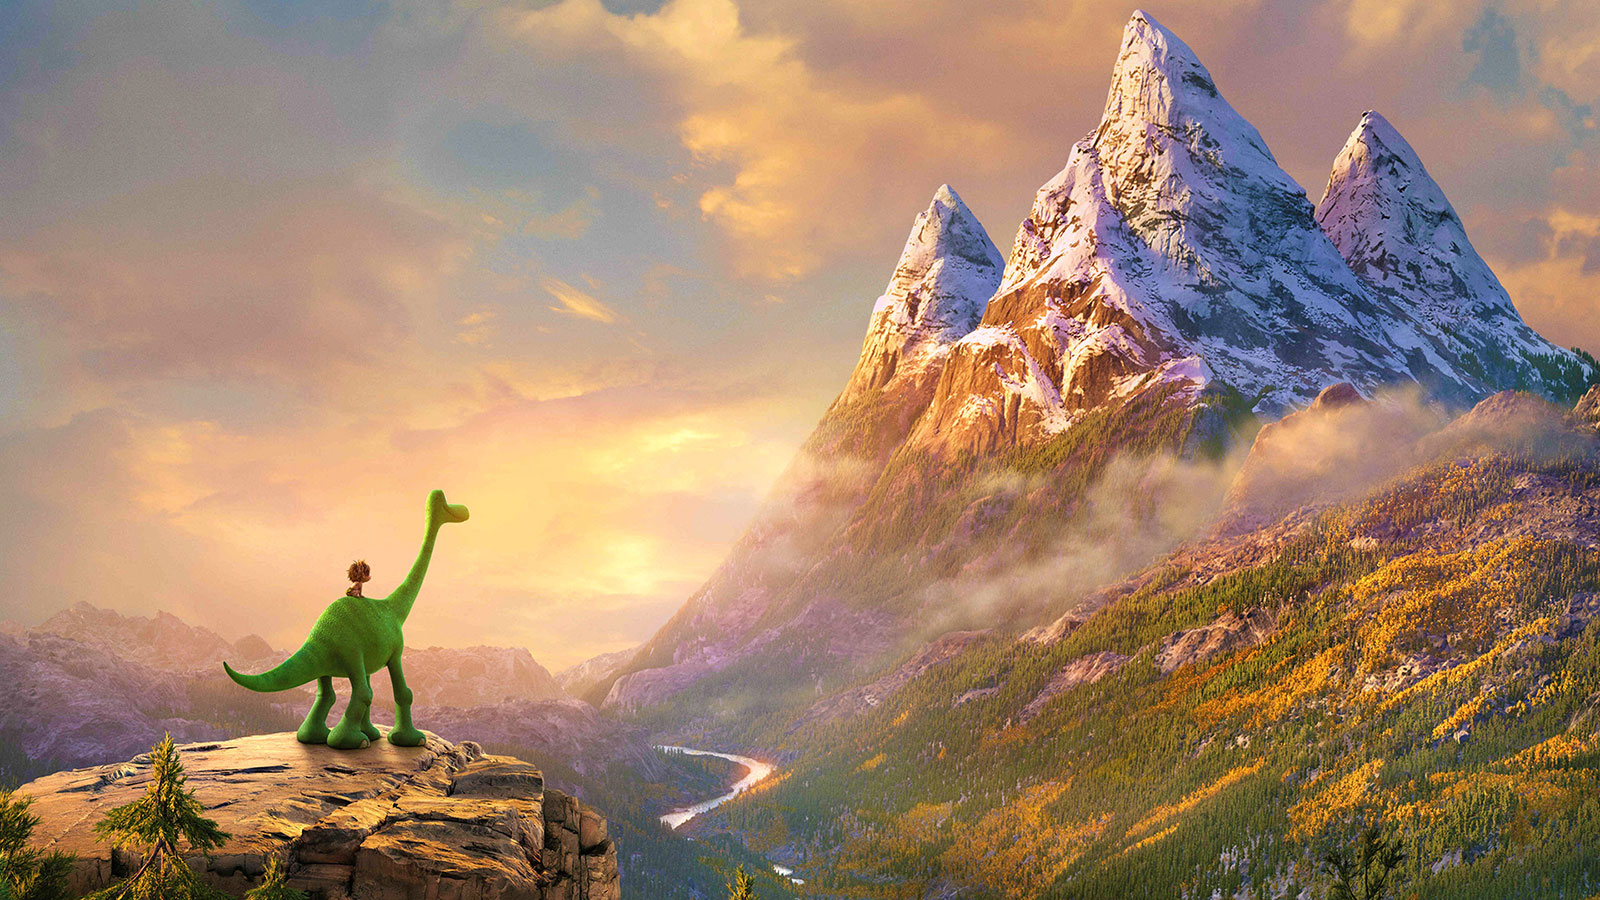 I Bet You Can’t Identify More Than 10/15 of These Pixar Movie Foods The Good Dinosaur